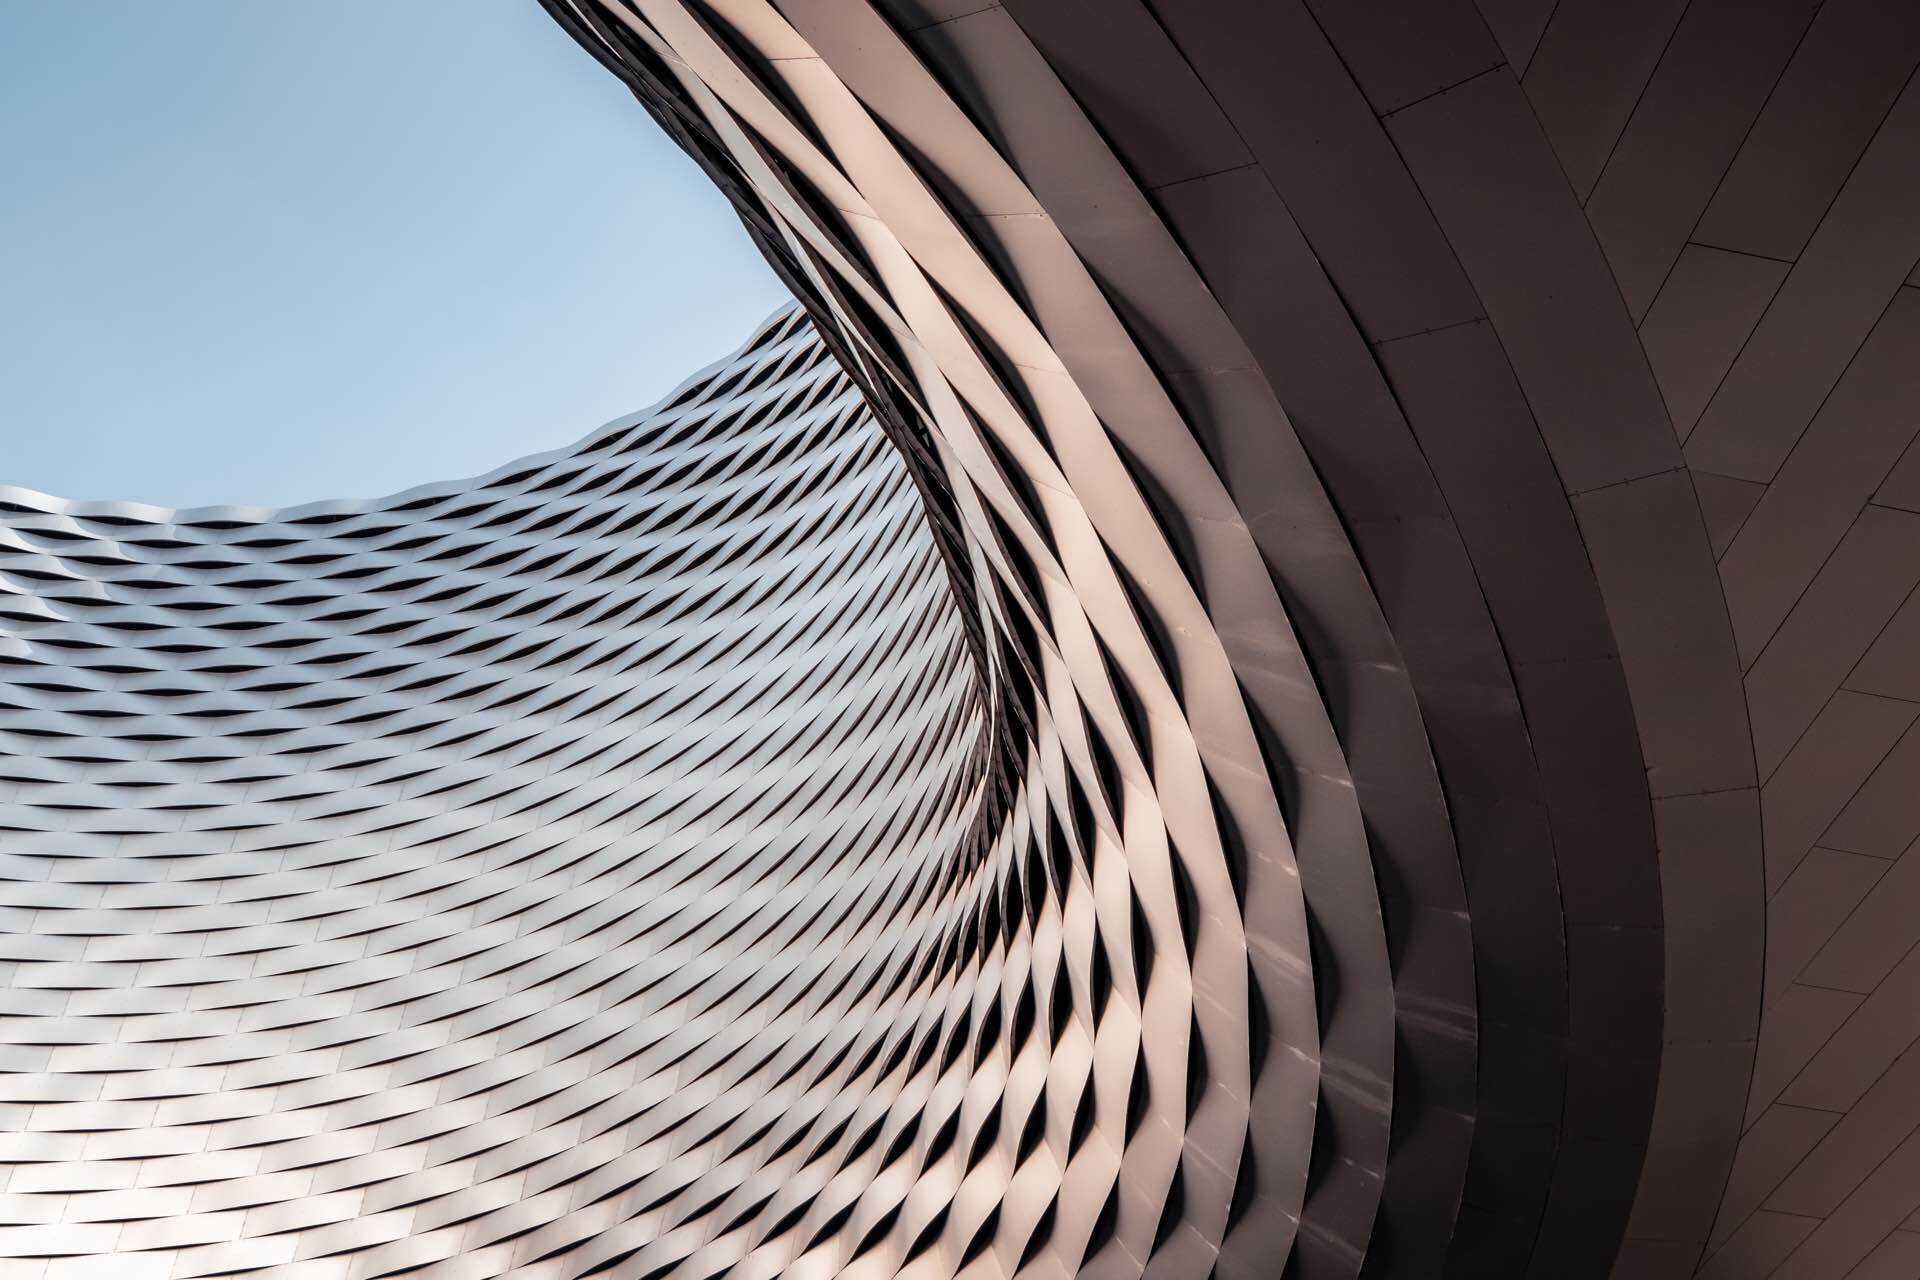 part of a curved building, swooping round against a blue sky